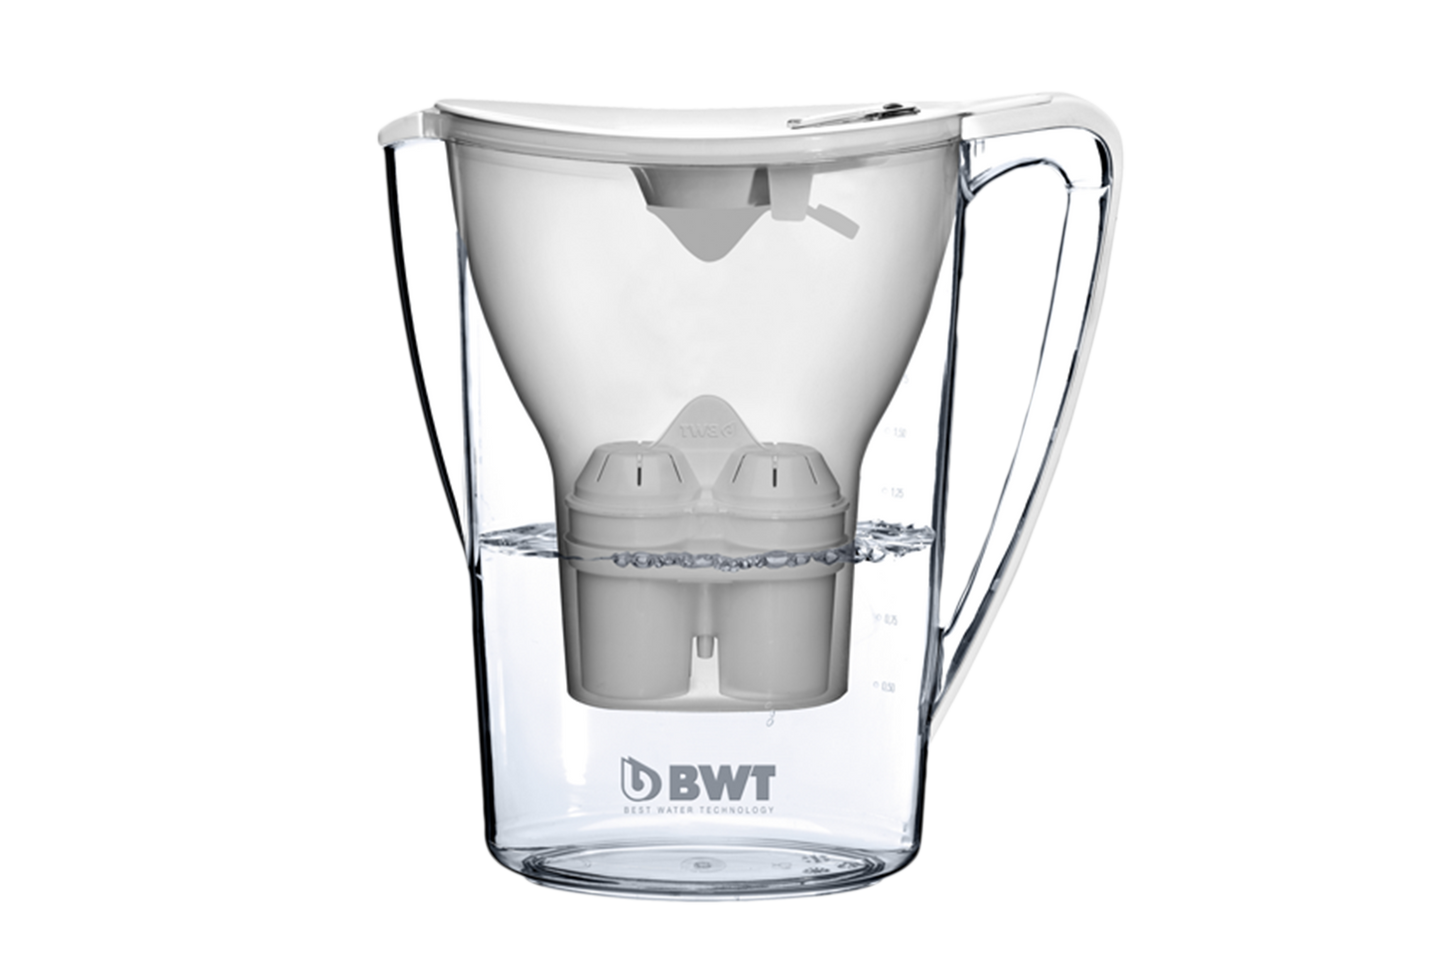 A fantastic addition to your home brewing repertoire, this water filter jug transforms your tap water into brew water capable of creating sweet and complex cups of coffee.